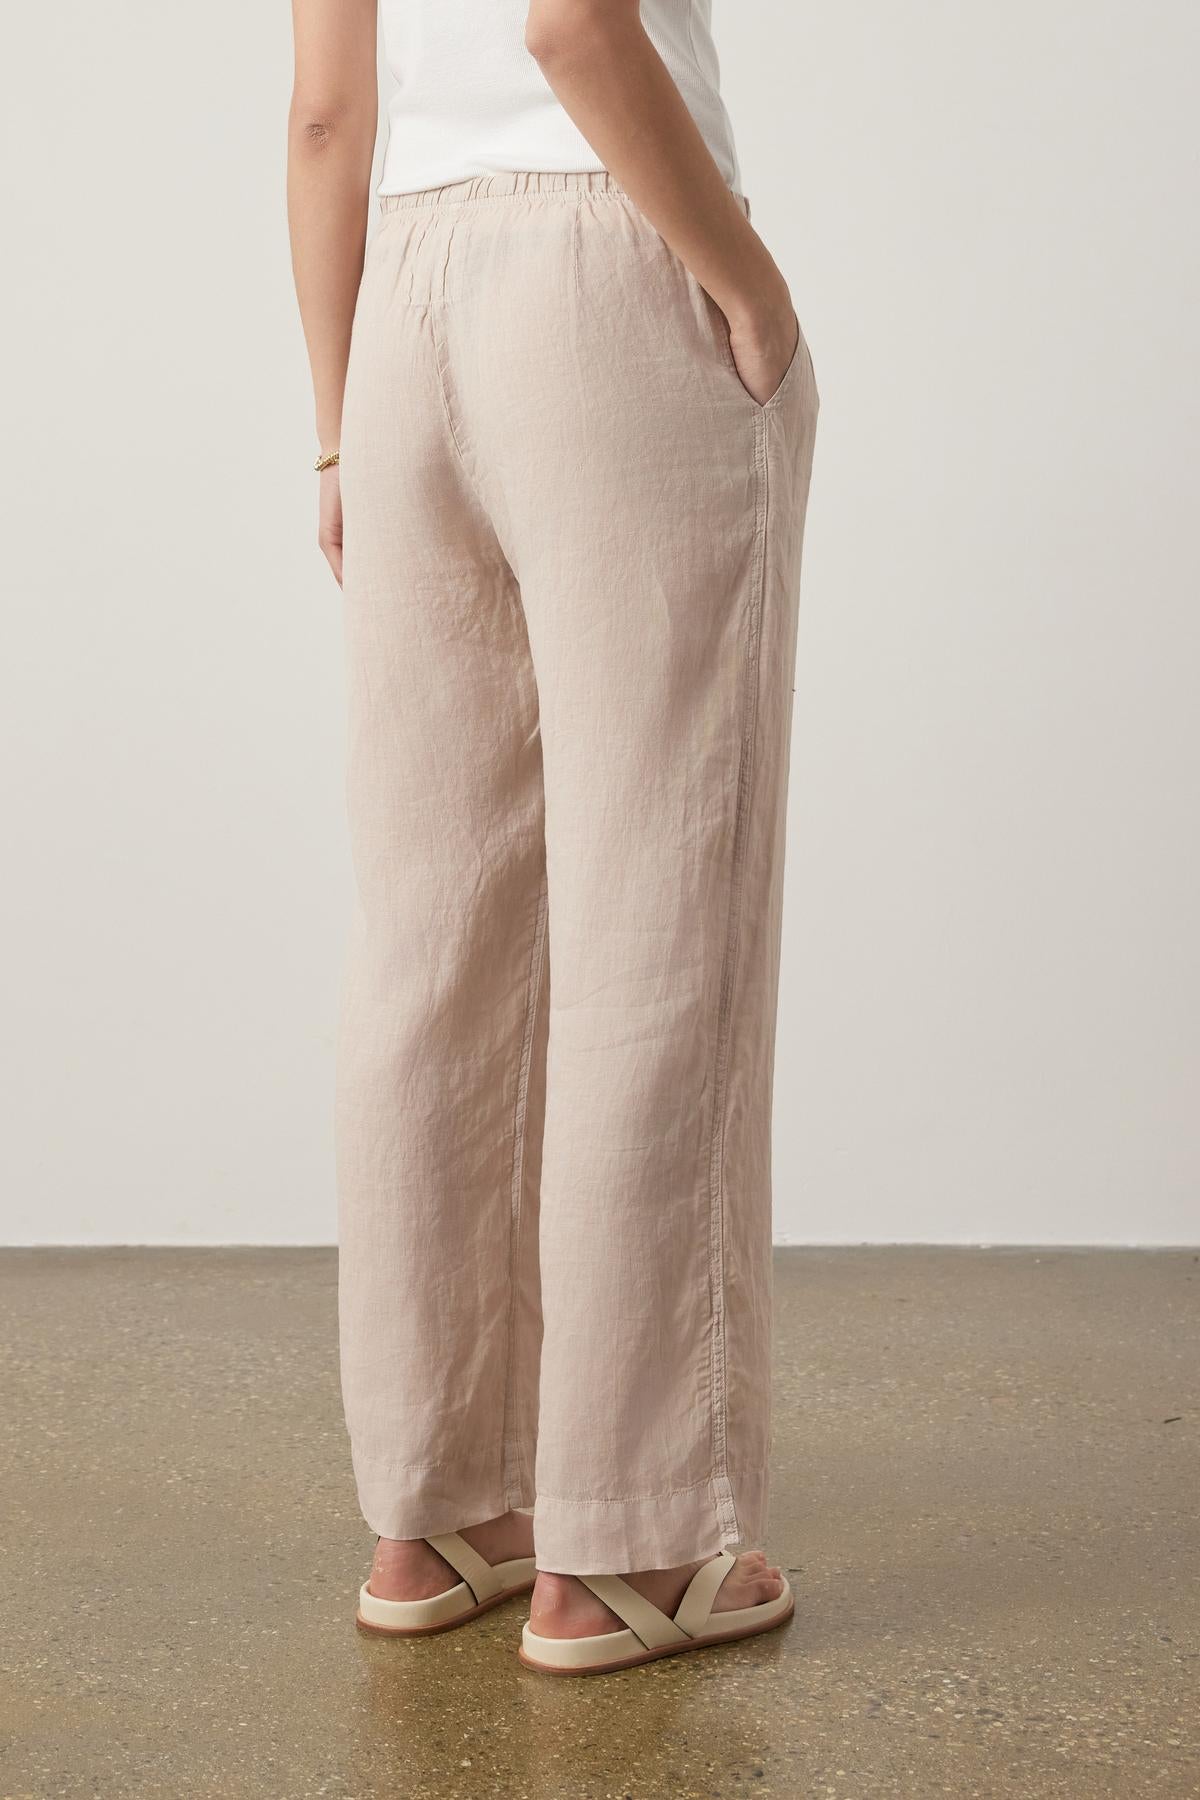   Woman in beige Velvet by Jenny Graham PICO LINEN PANT and white sandals, standing with back to the camera, focusing on the clothing fit and texture. 